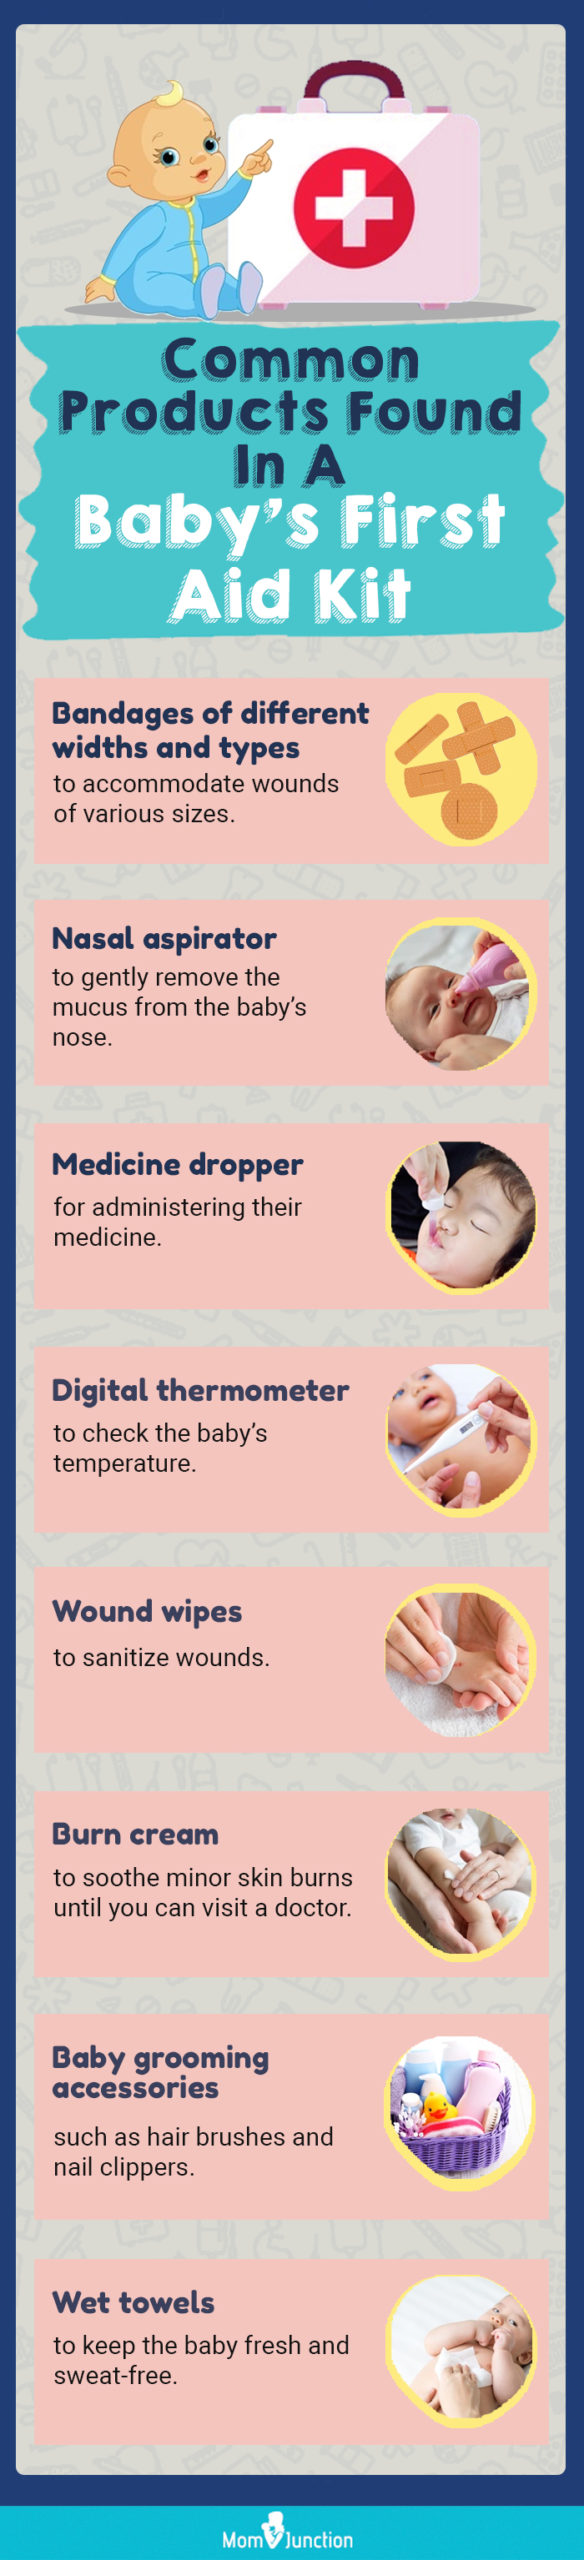 Common Products Found In A Baby’s First Aid Kit (infographic)